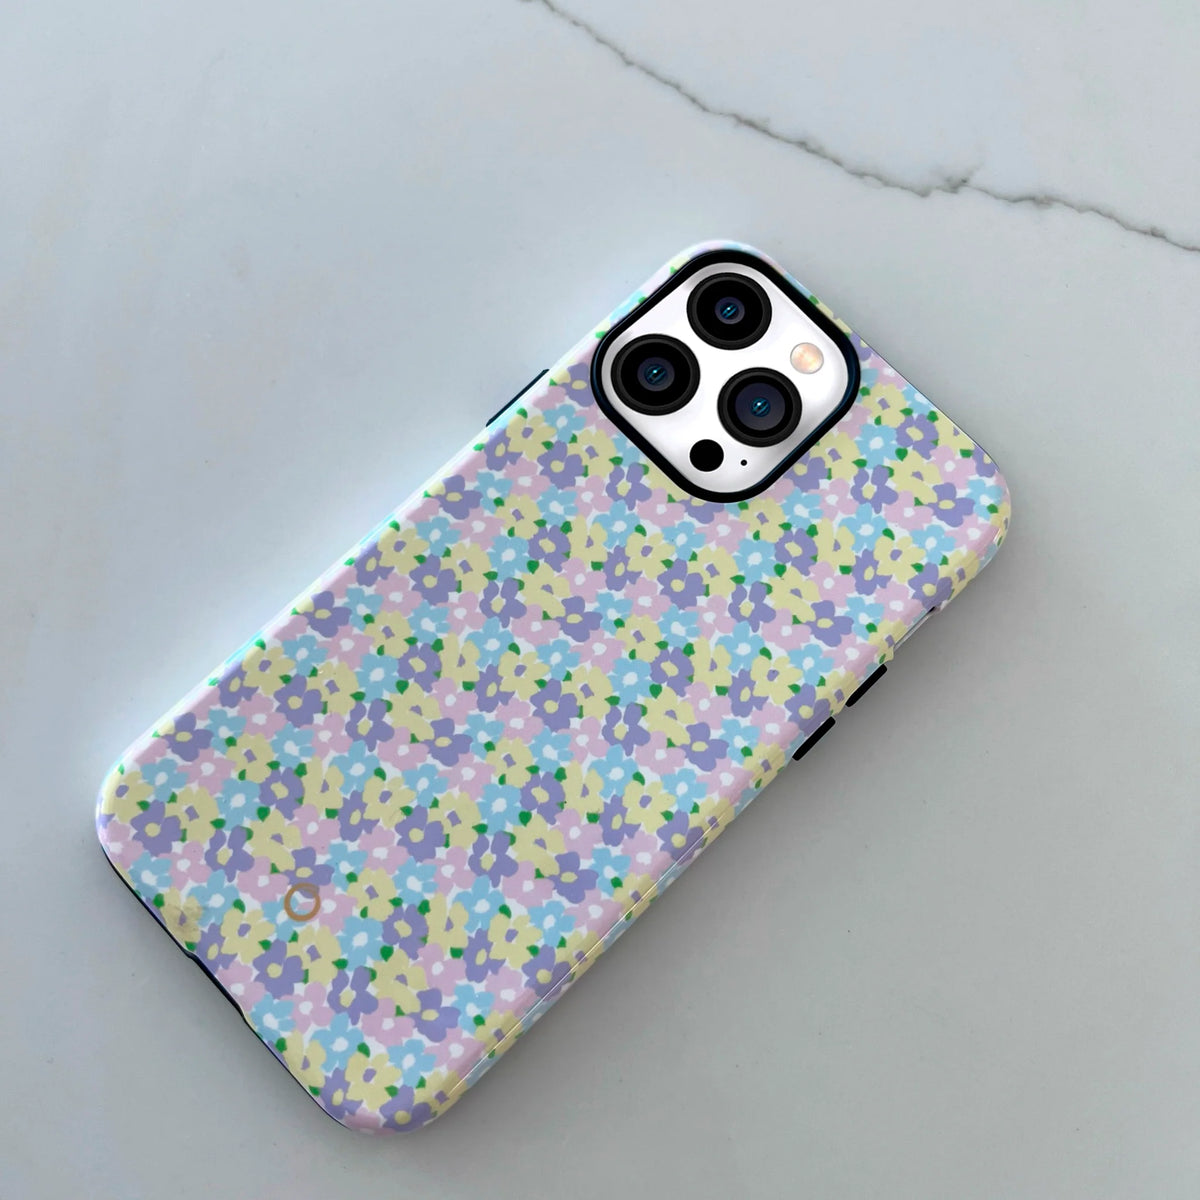 Cosmos Spring Flowers iPhone Case - iPhone 12 Pro Max